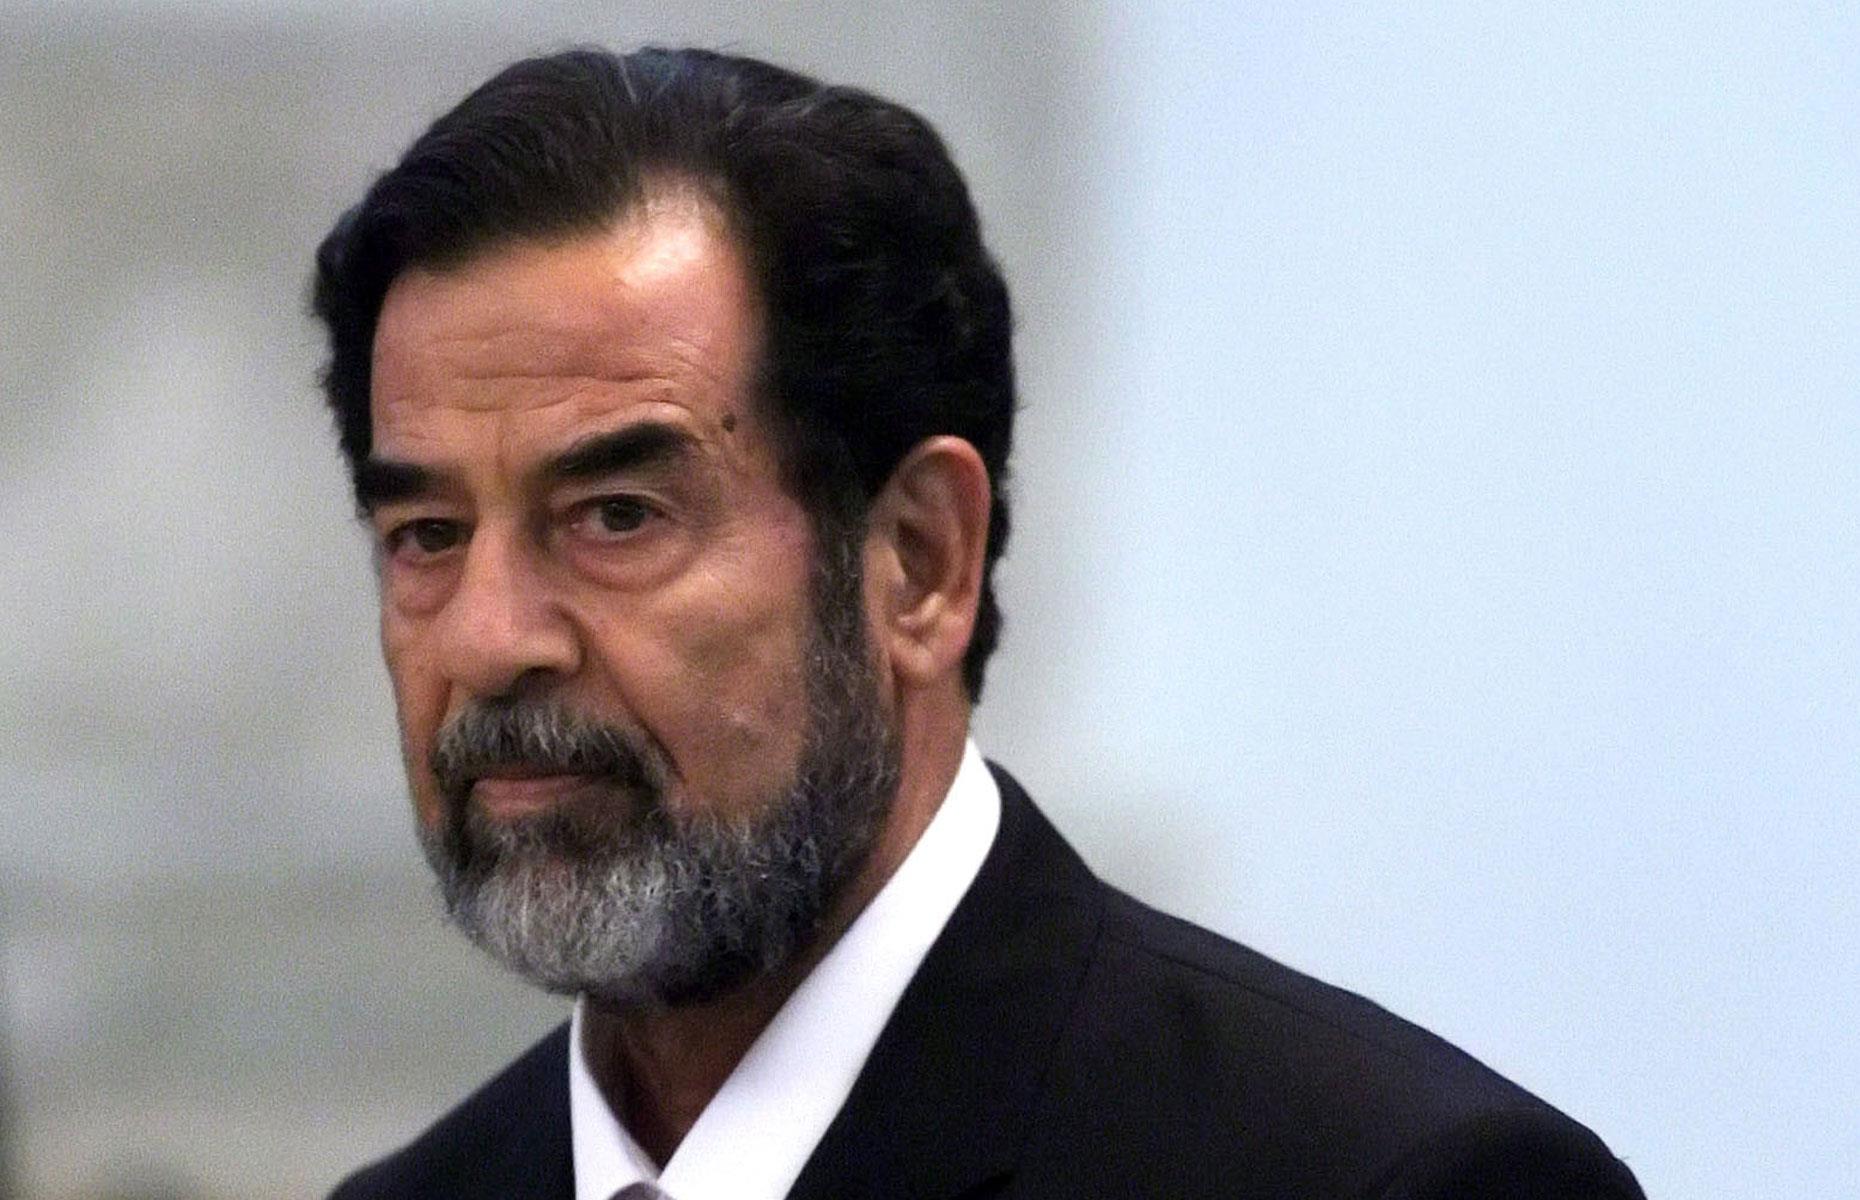 <p>Saddam Hussein amassed a colossal fortune as president of Iraq from 1979 to his ousting in 2003. Helping himself freely to the Iraqi people's money, the notorious dictator was worth $2 billion in 2003 according to <em>Forbes</em>, which translates to $2.8 billion in 2020. The many assets he owned included 89 palaces, numerous luxury cars and large stakes in media companies such as France's Lagardere SCA.</p>